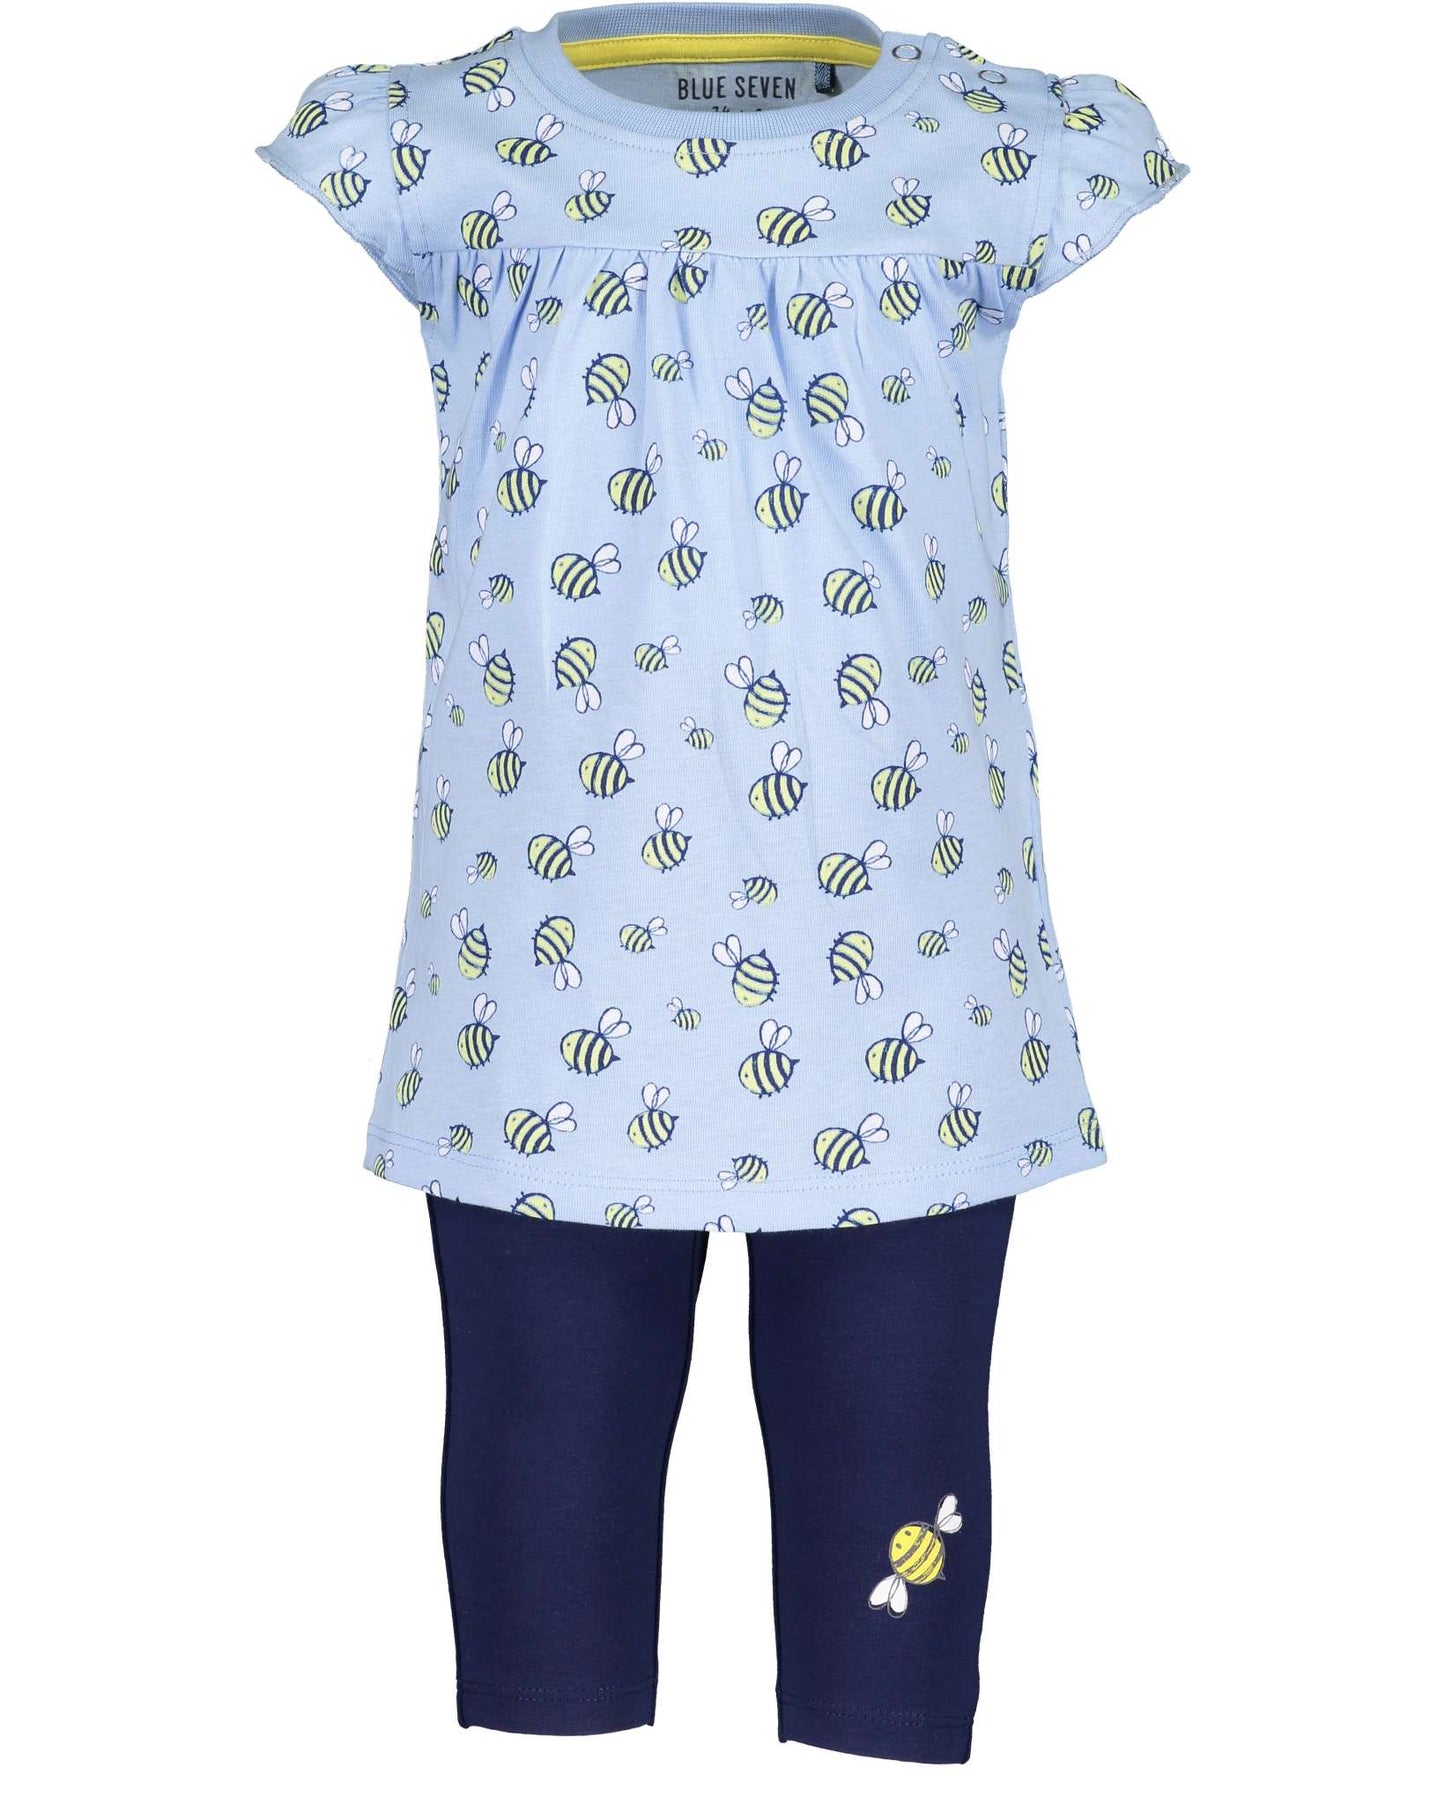 Blue bumble bee tunic and leggings